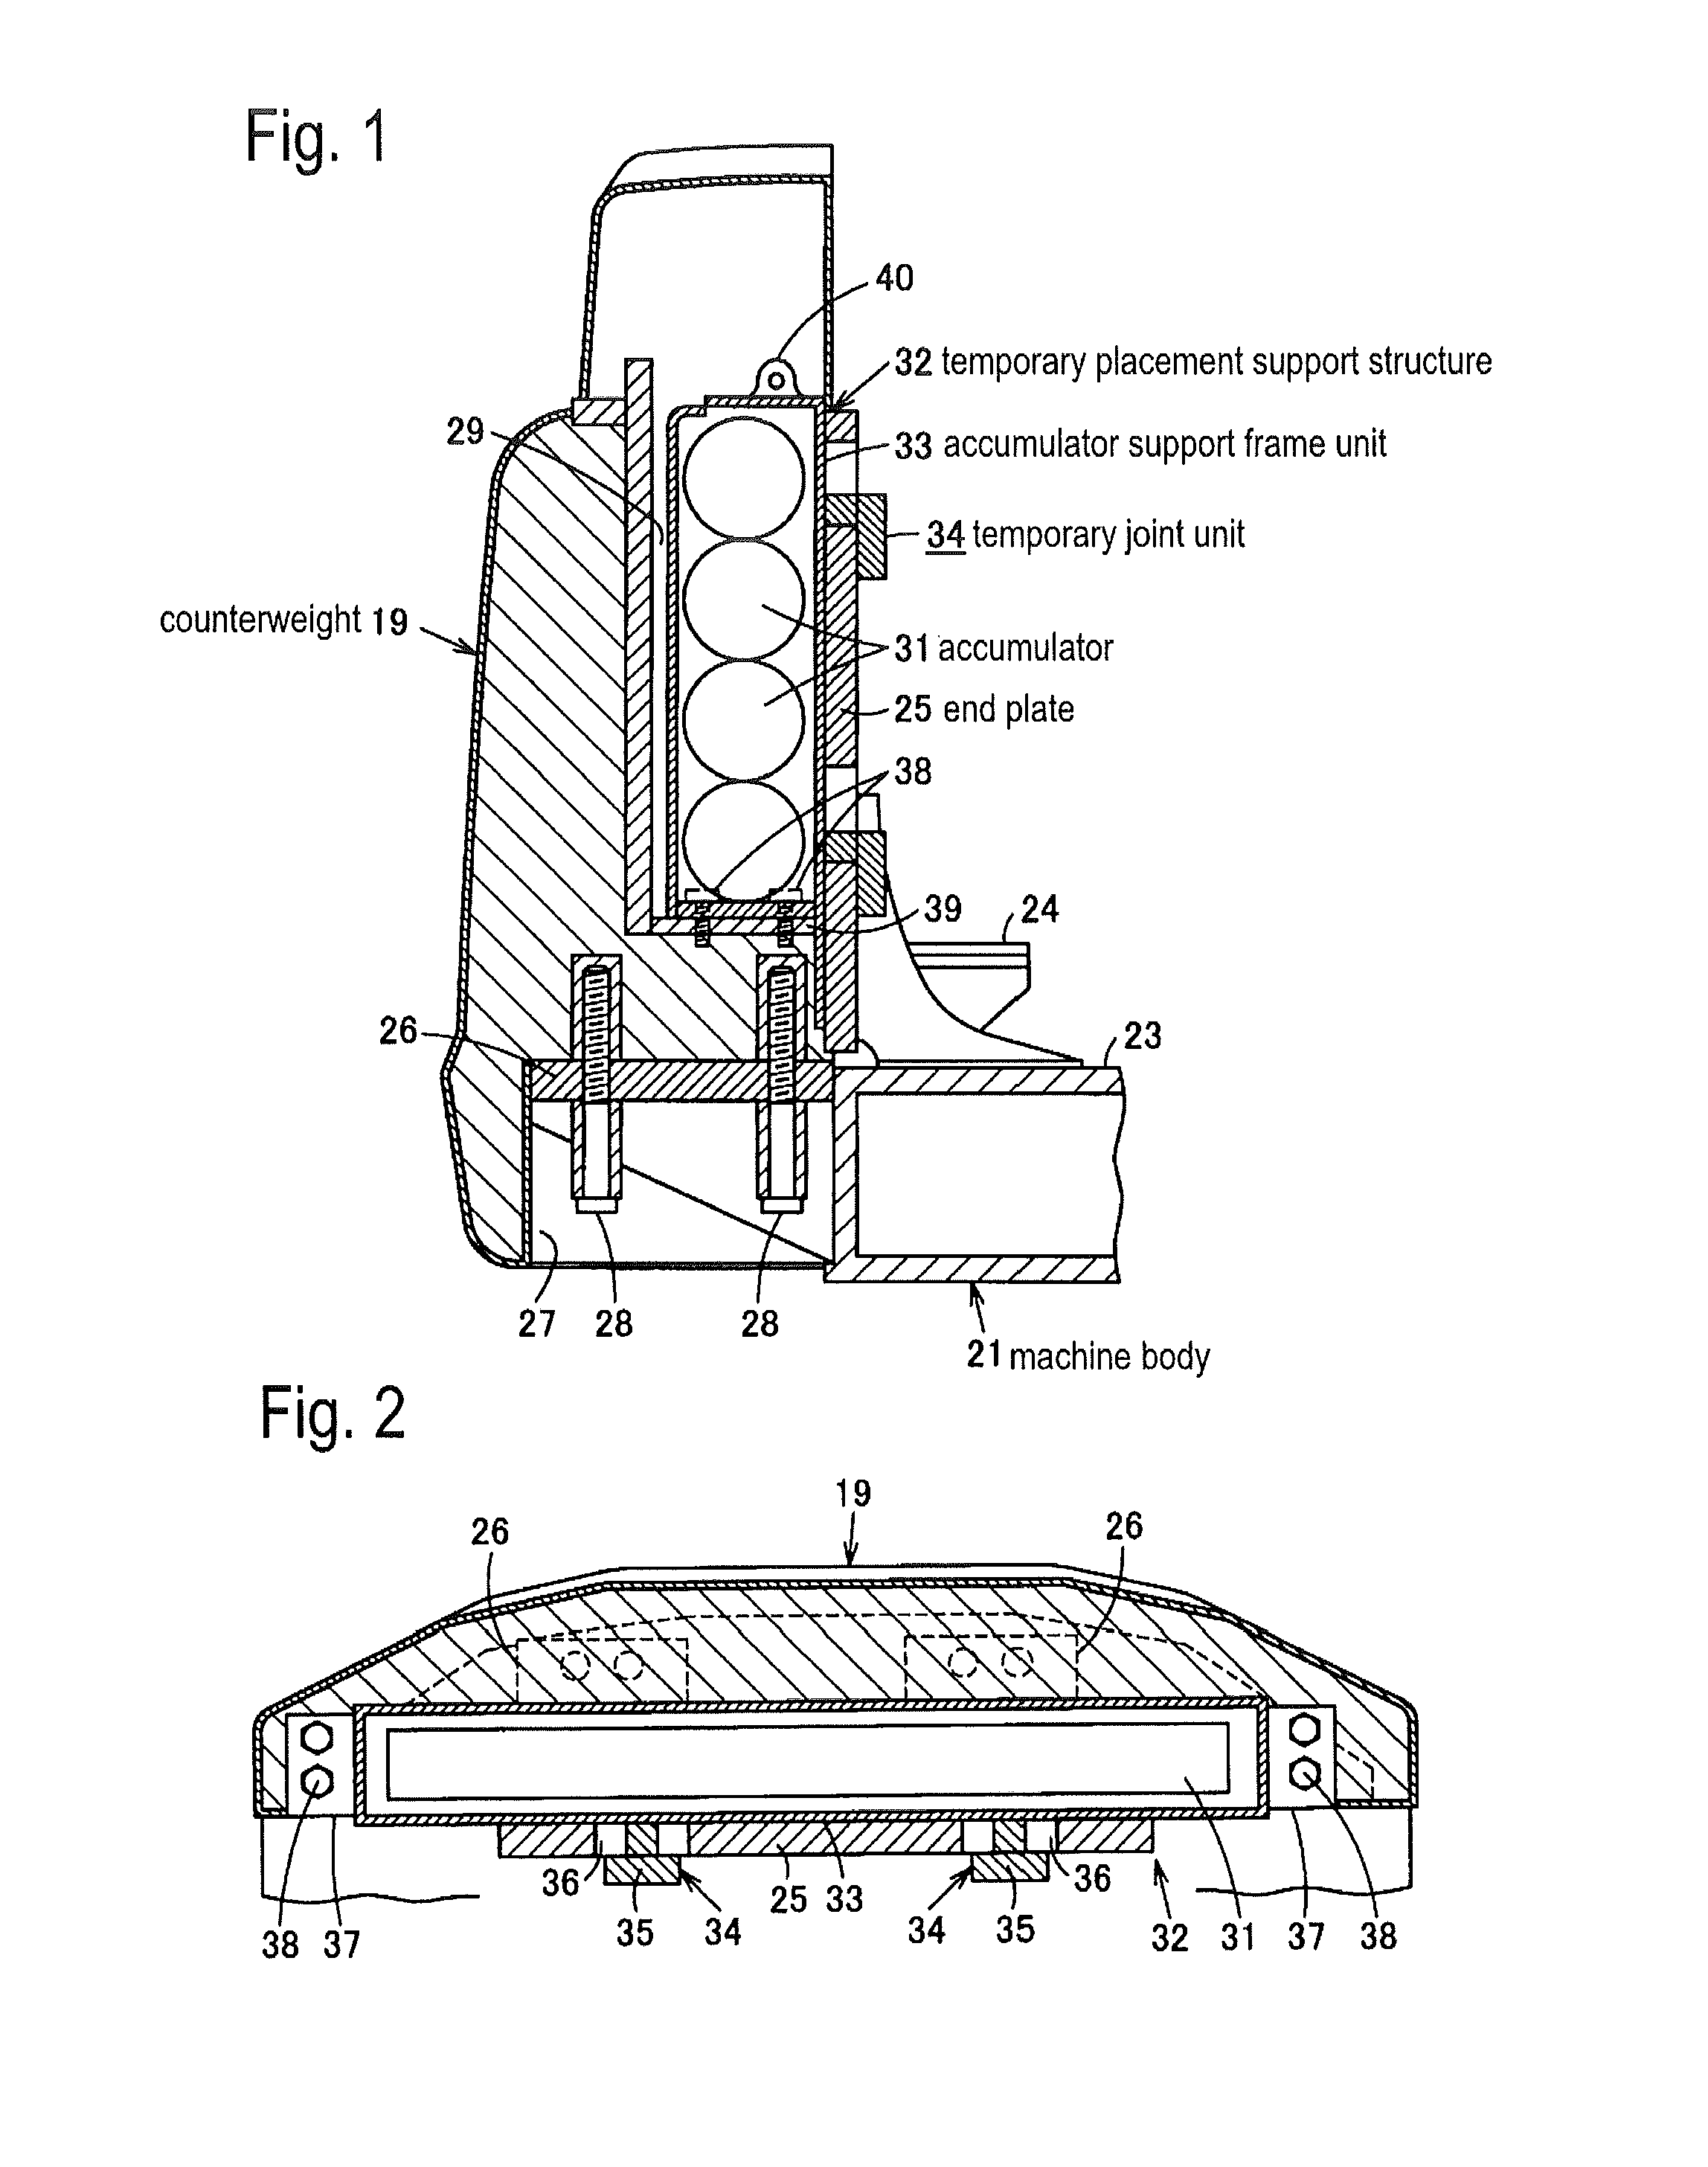 Counterweight Device for Arranging Accumulators Inside the Counterweight of a Working Machine